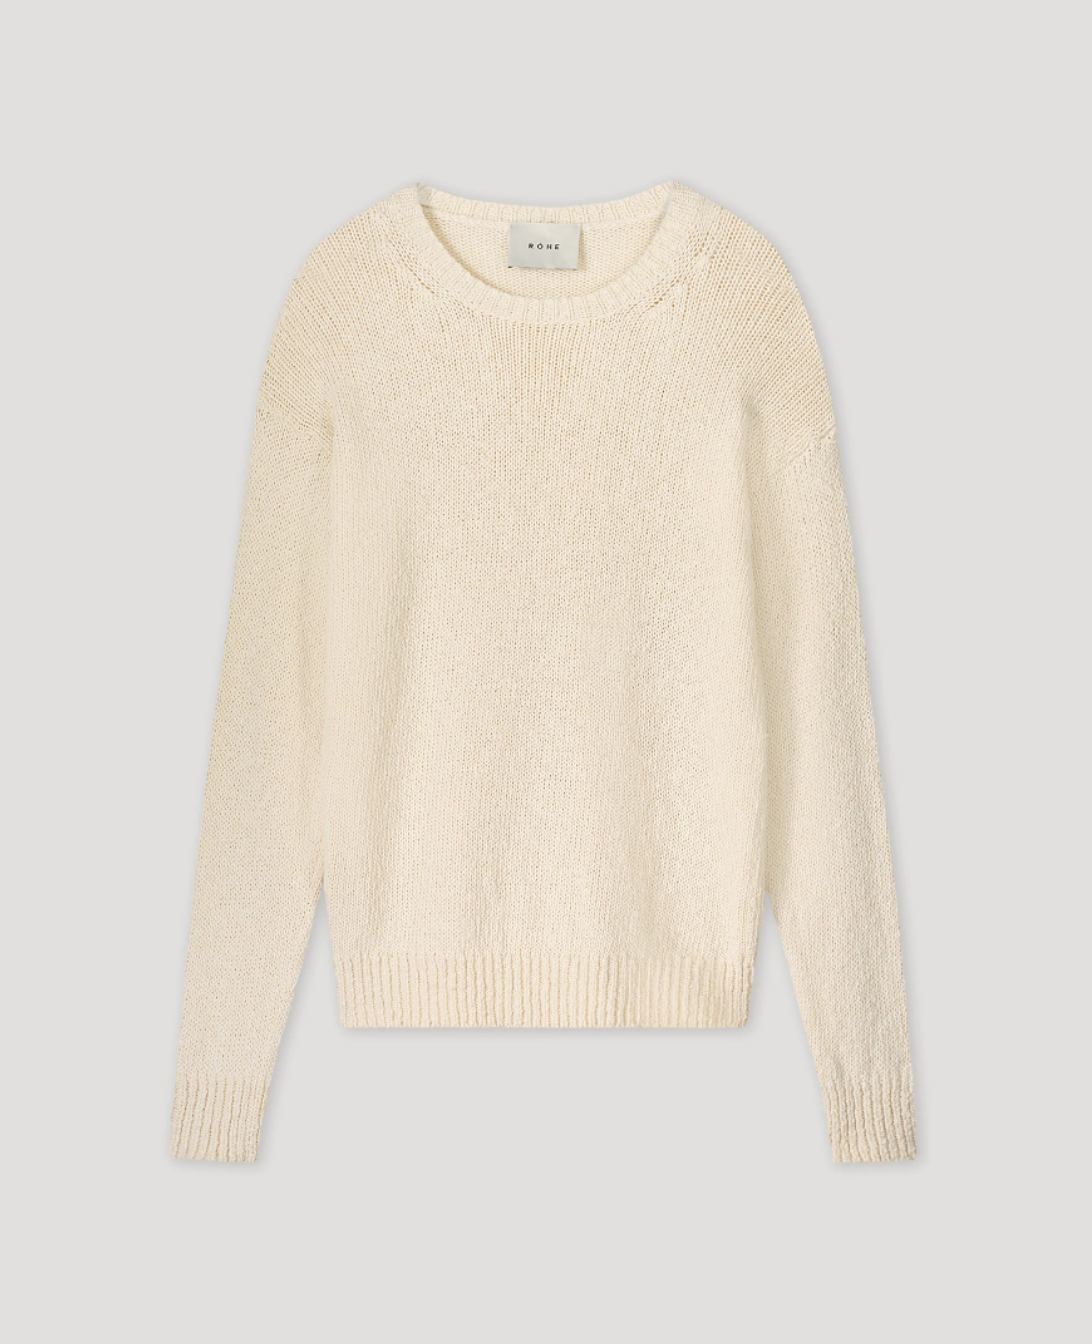 Marie Pullover in off white by Róhe Frames